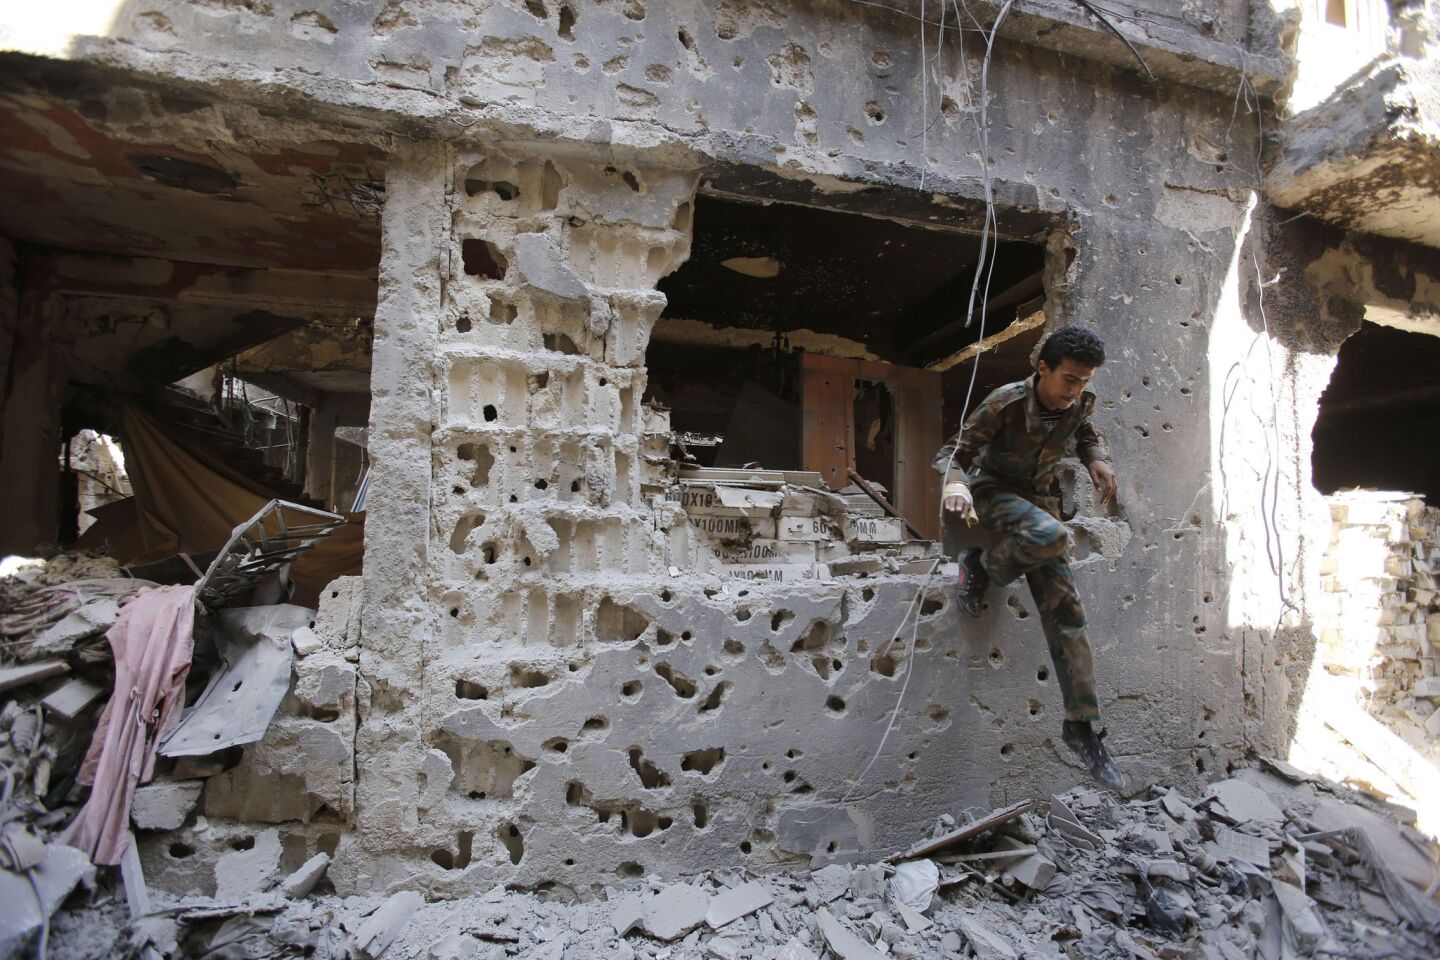 A fighter of the Popular Front for the Liberation of Palestine General Command, allied with Syrian President Bashar Assad, jumps through the window of a destroyed building in the Yarmouk refugee camp in Damascus.